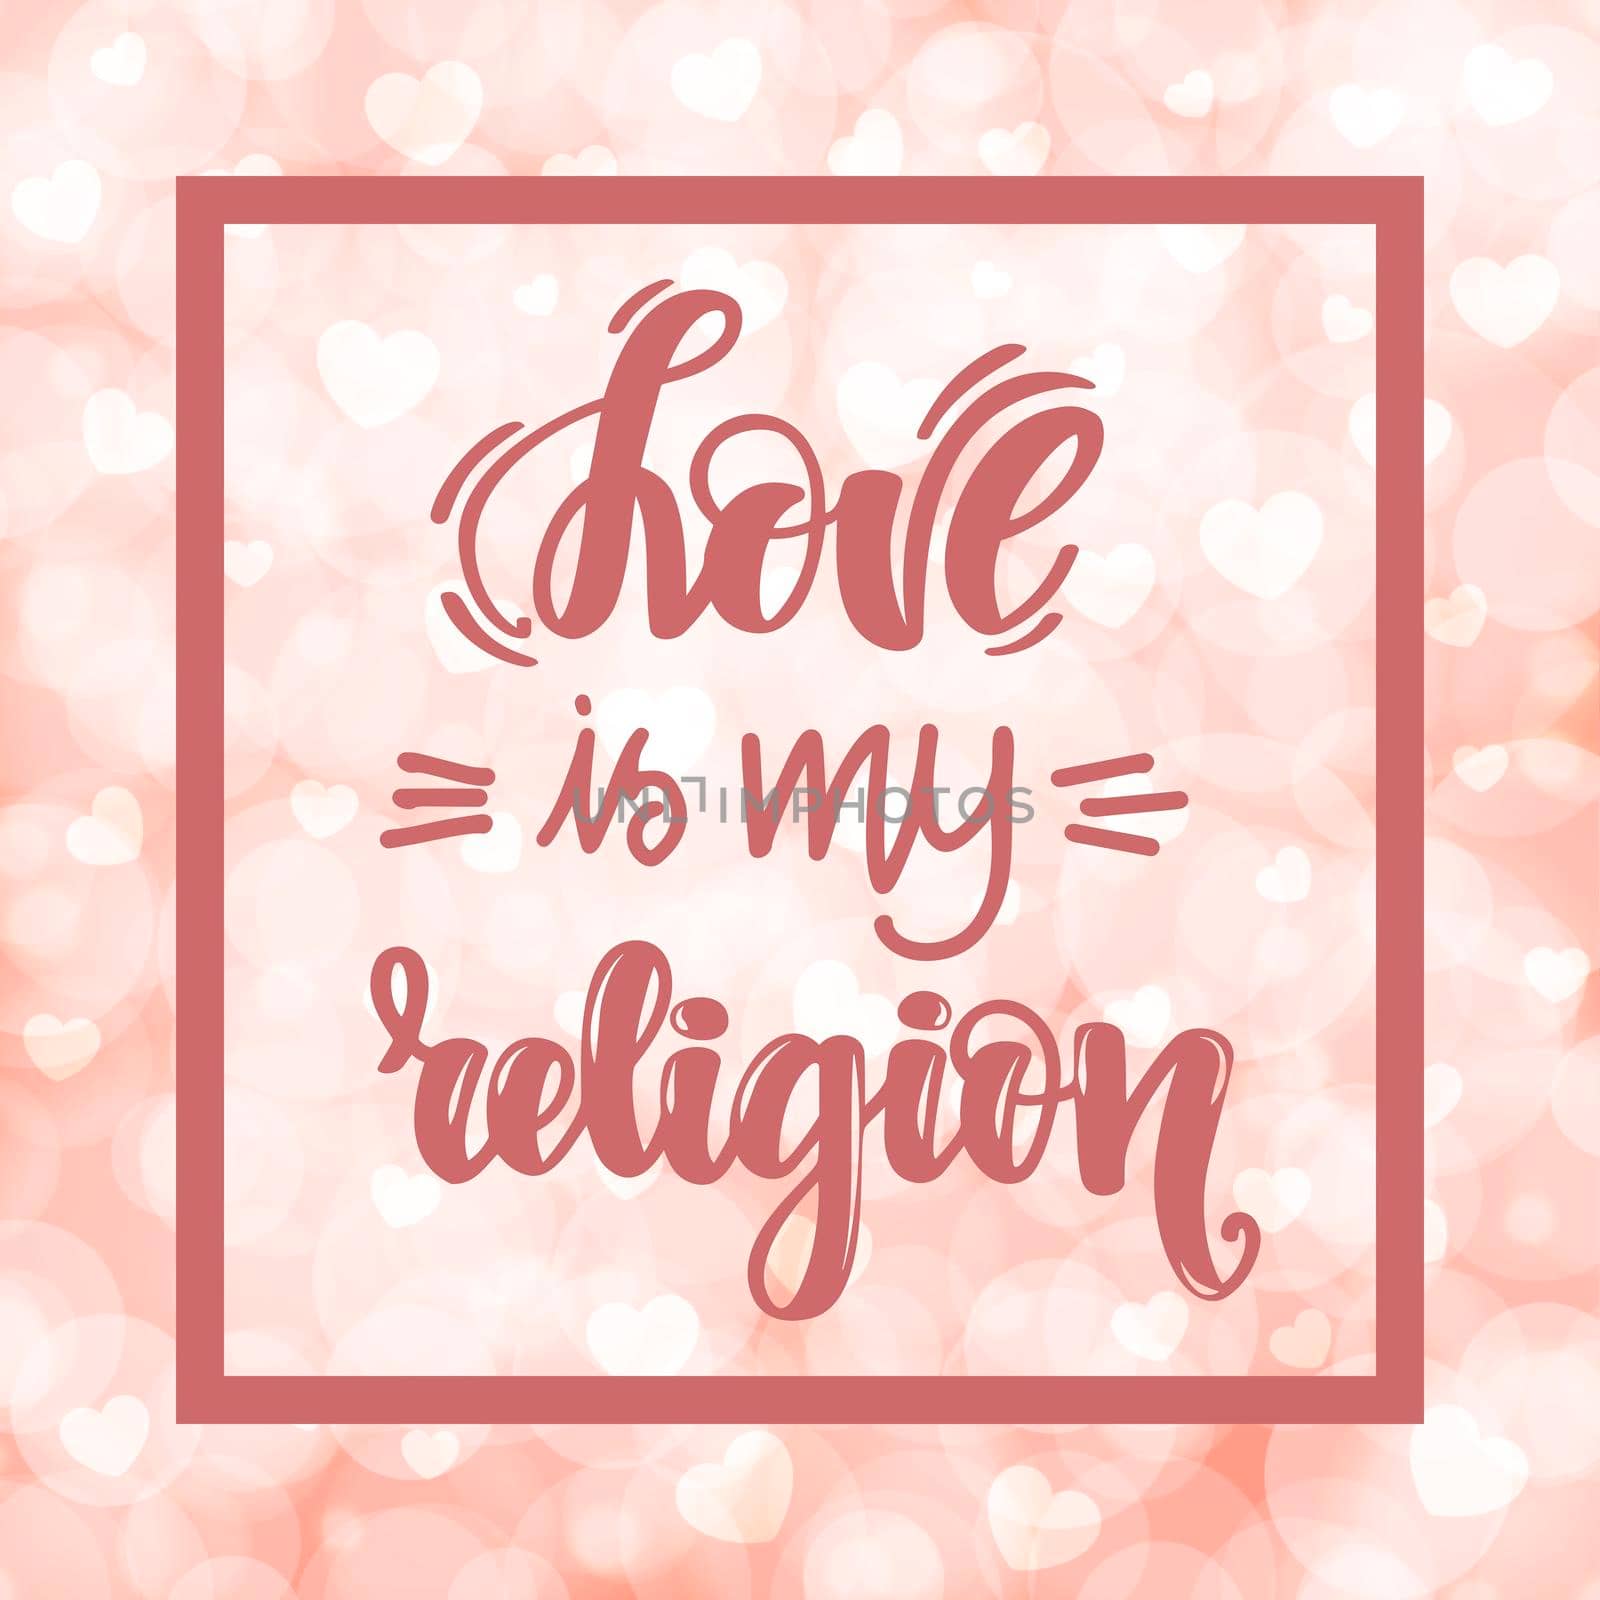 Love is my religion. Handwritten lettering on blurred bokeh background with hearts. illustration for posters, cards and much more.